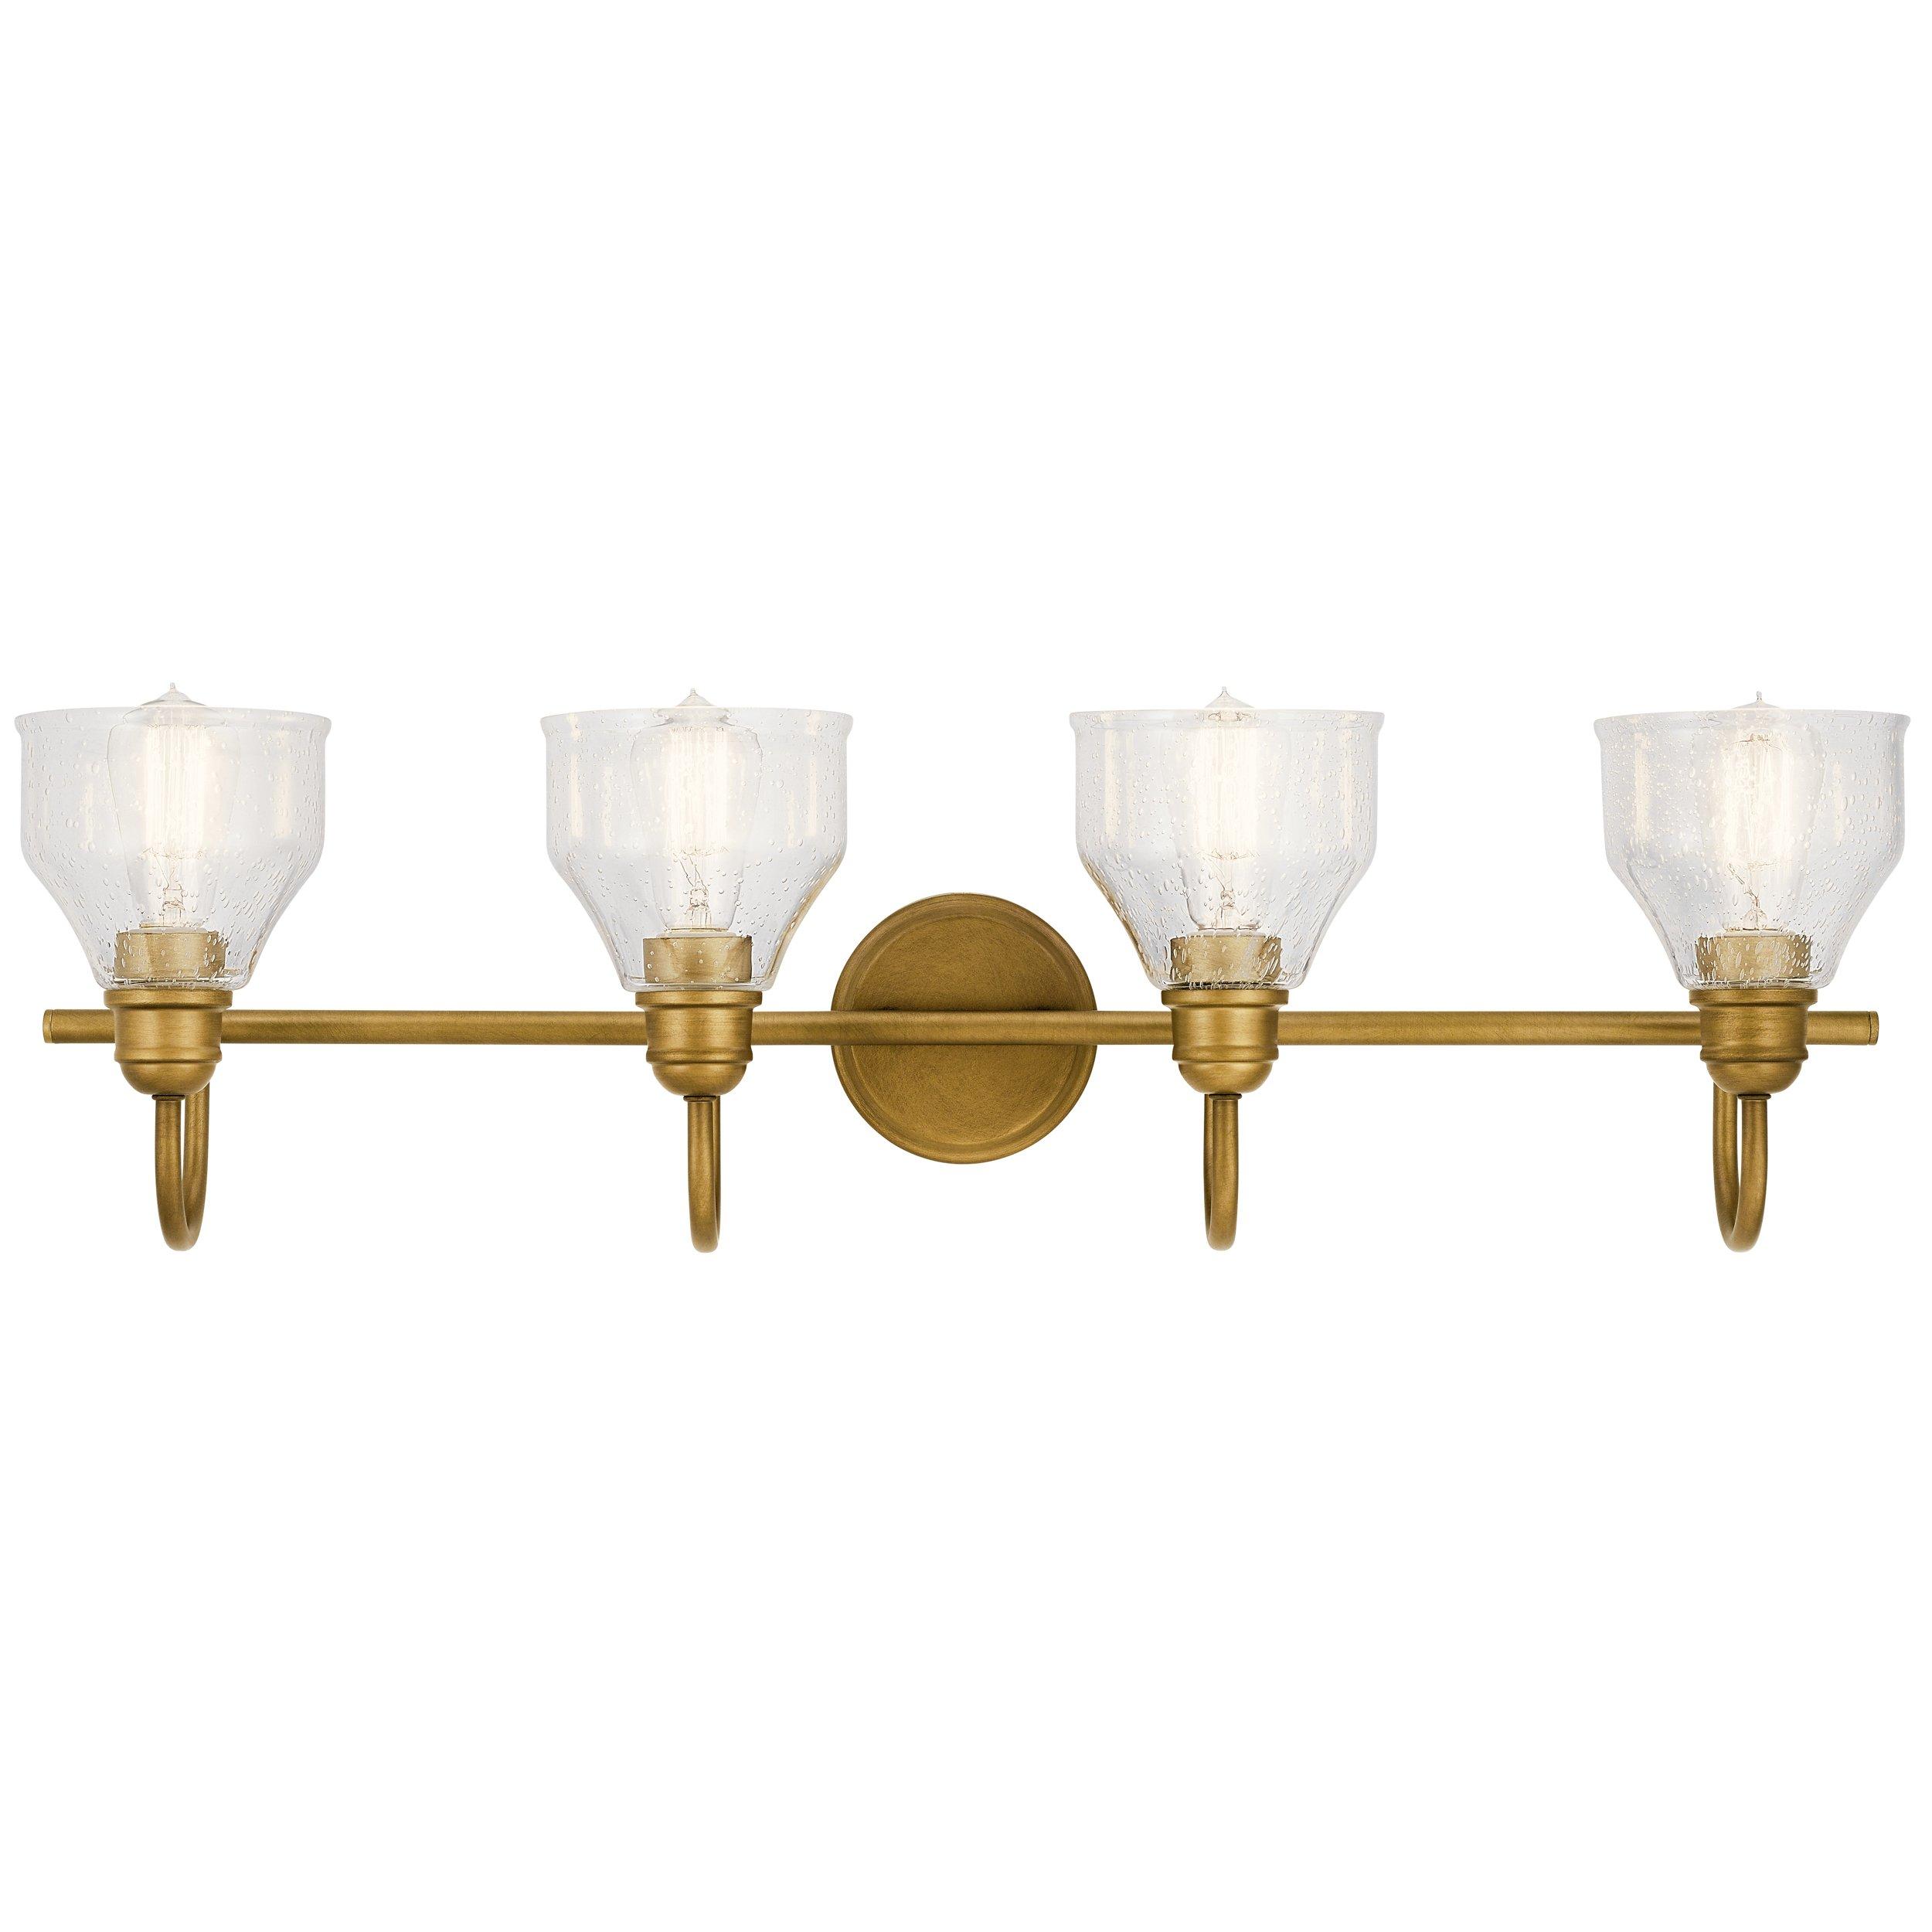 Avery Natural Brass Quad Sconce